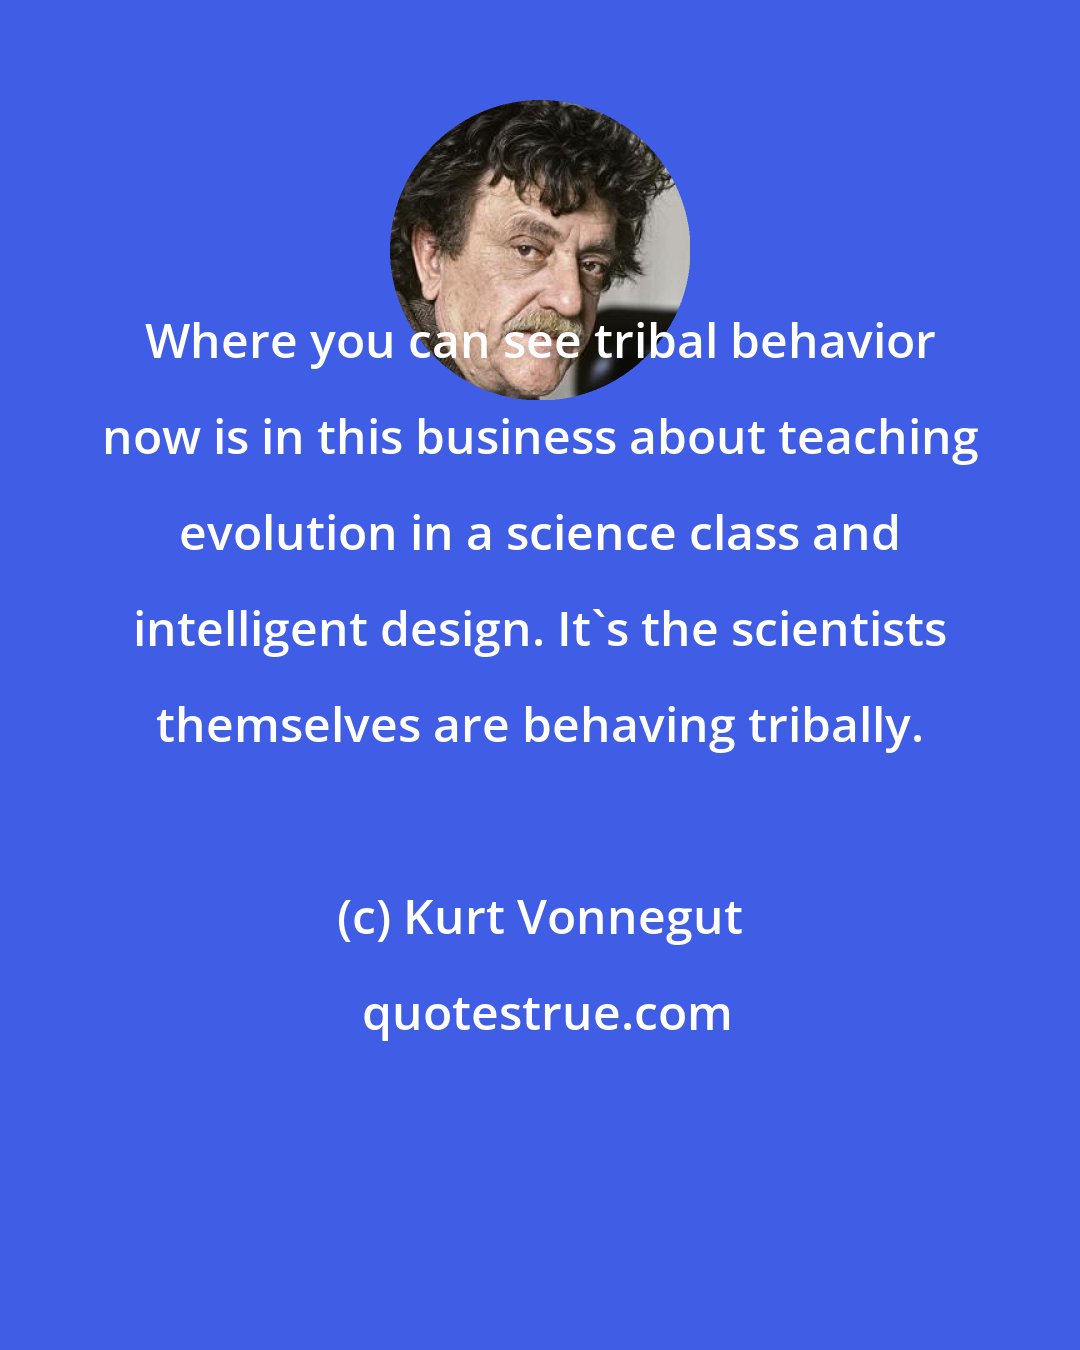 Kurt Vonnegut: Where you can see tribal behavior now is in this business about teaching evolution in a science class and intelligent design. It's the scientists themselves are behaving tribally.